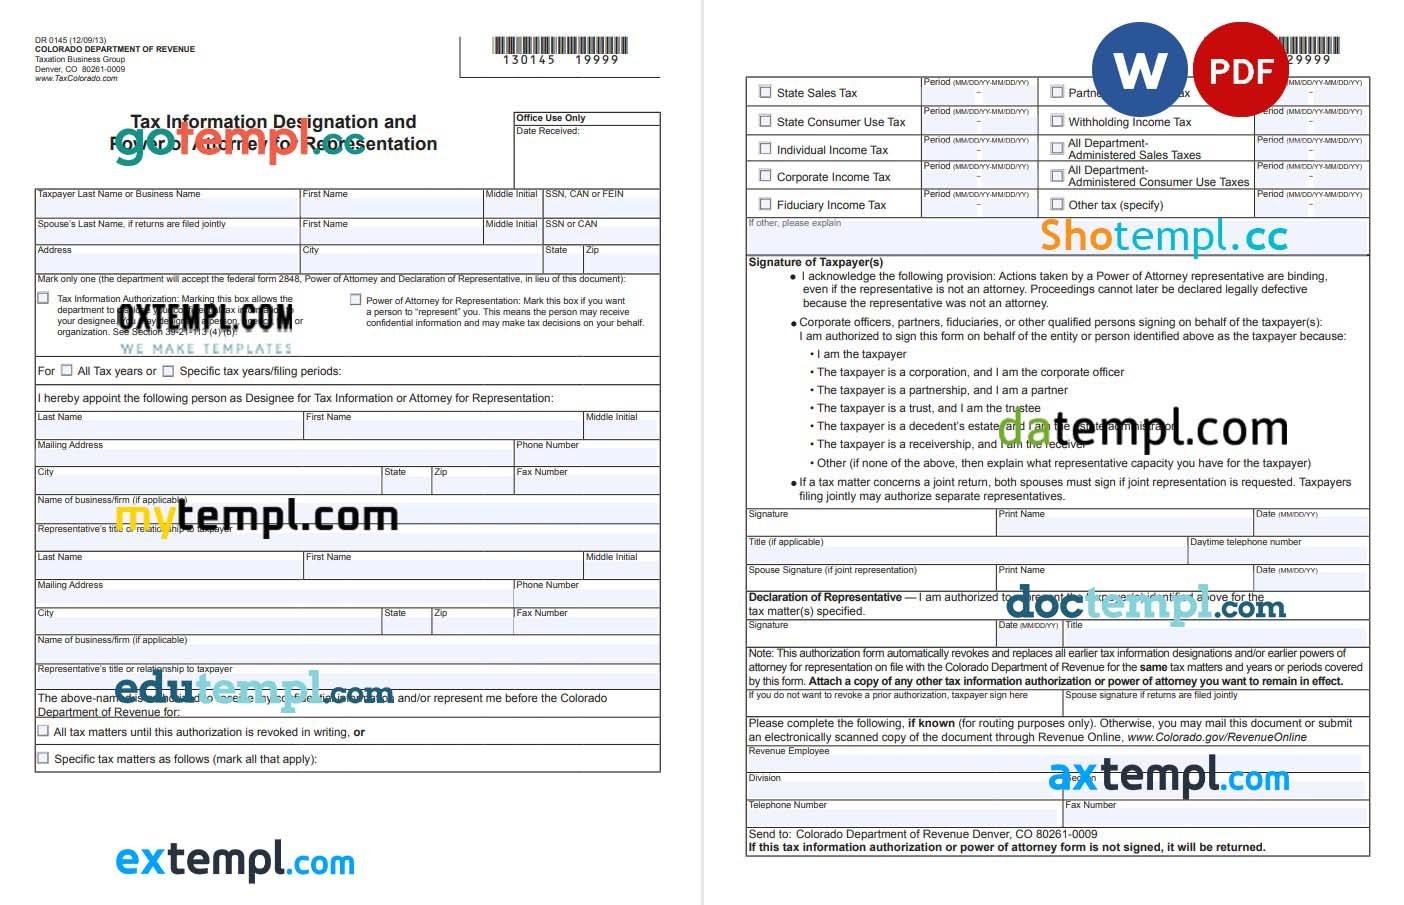 Colorado Tax Power of Attorney Form example, fully editable